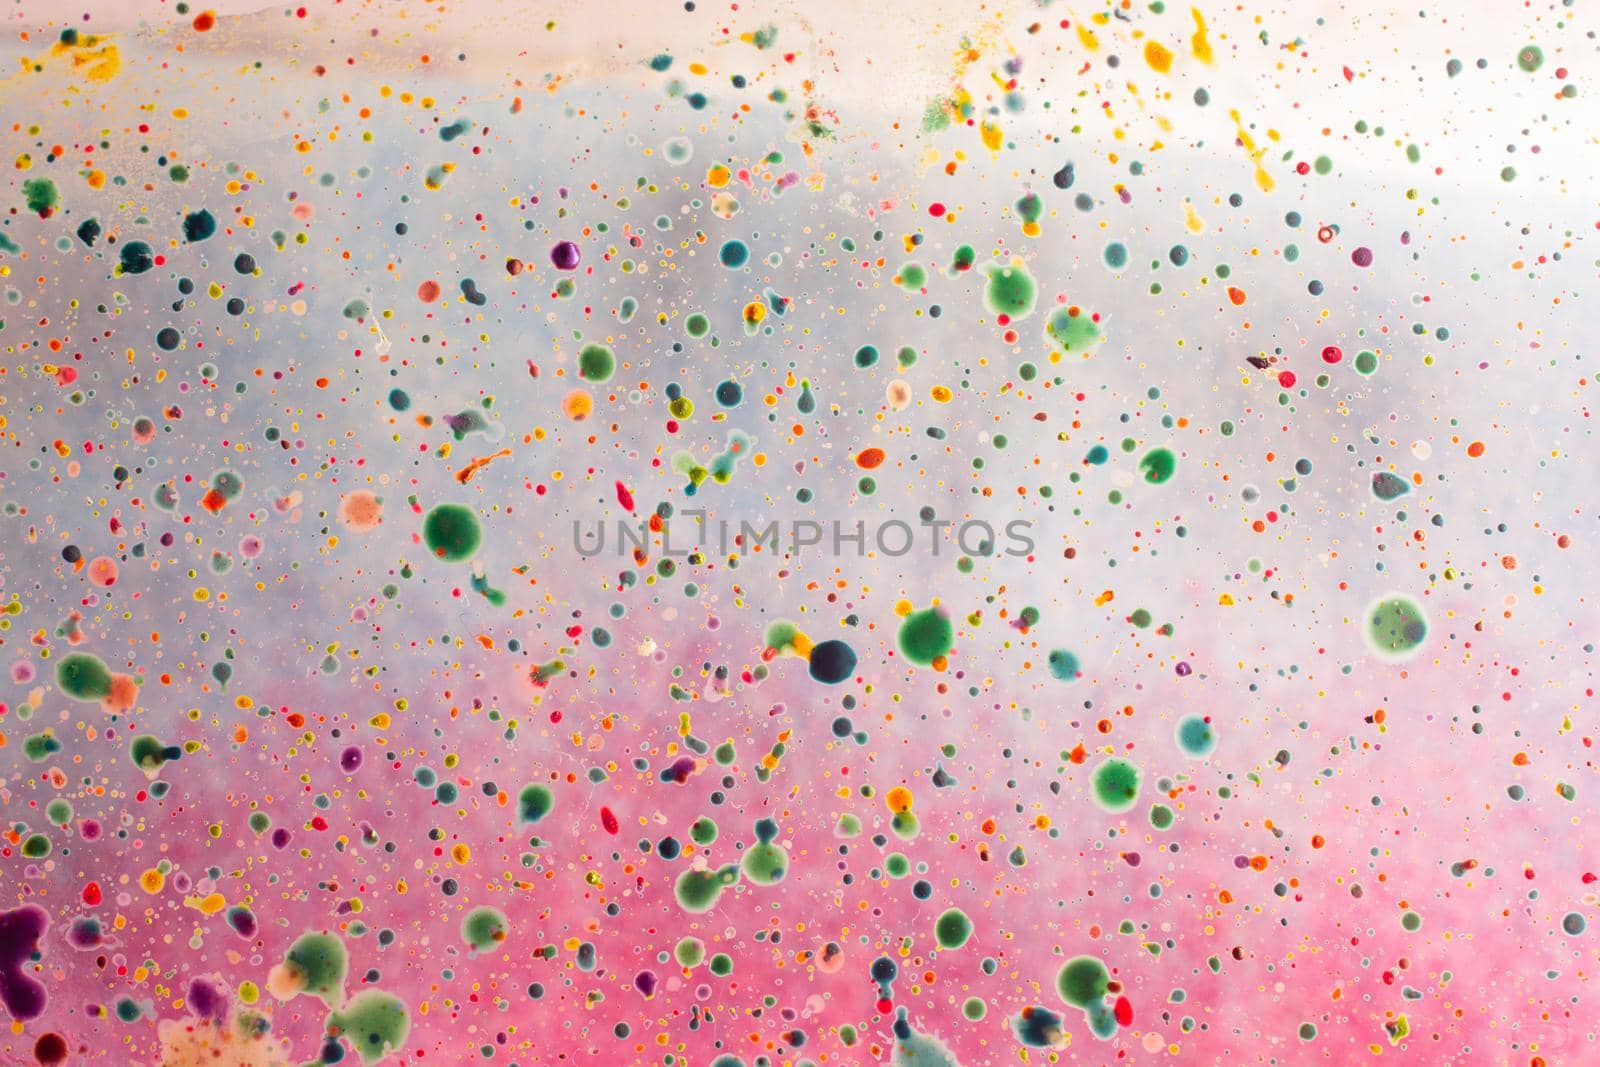 Dotted background formed by splashing watercolor paint by berkay